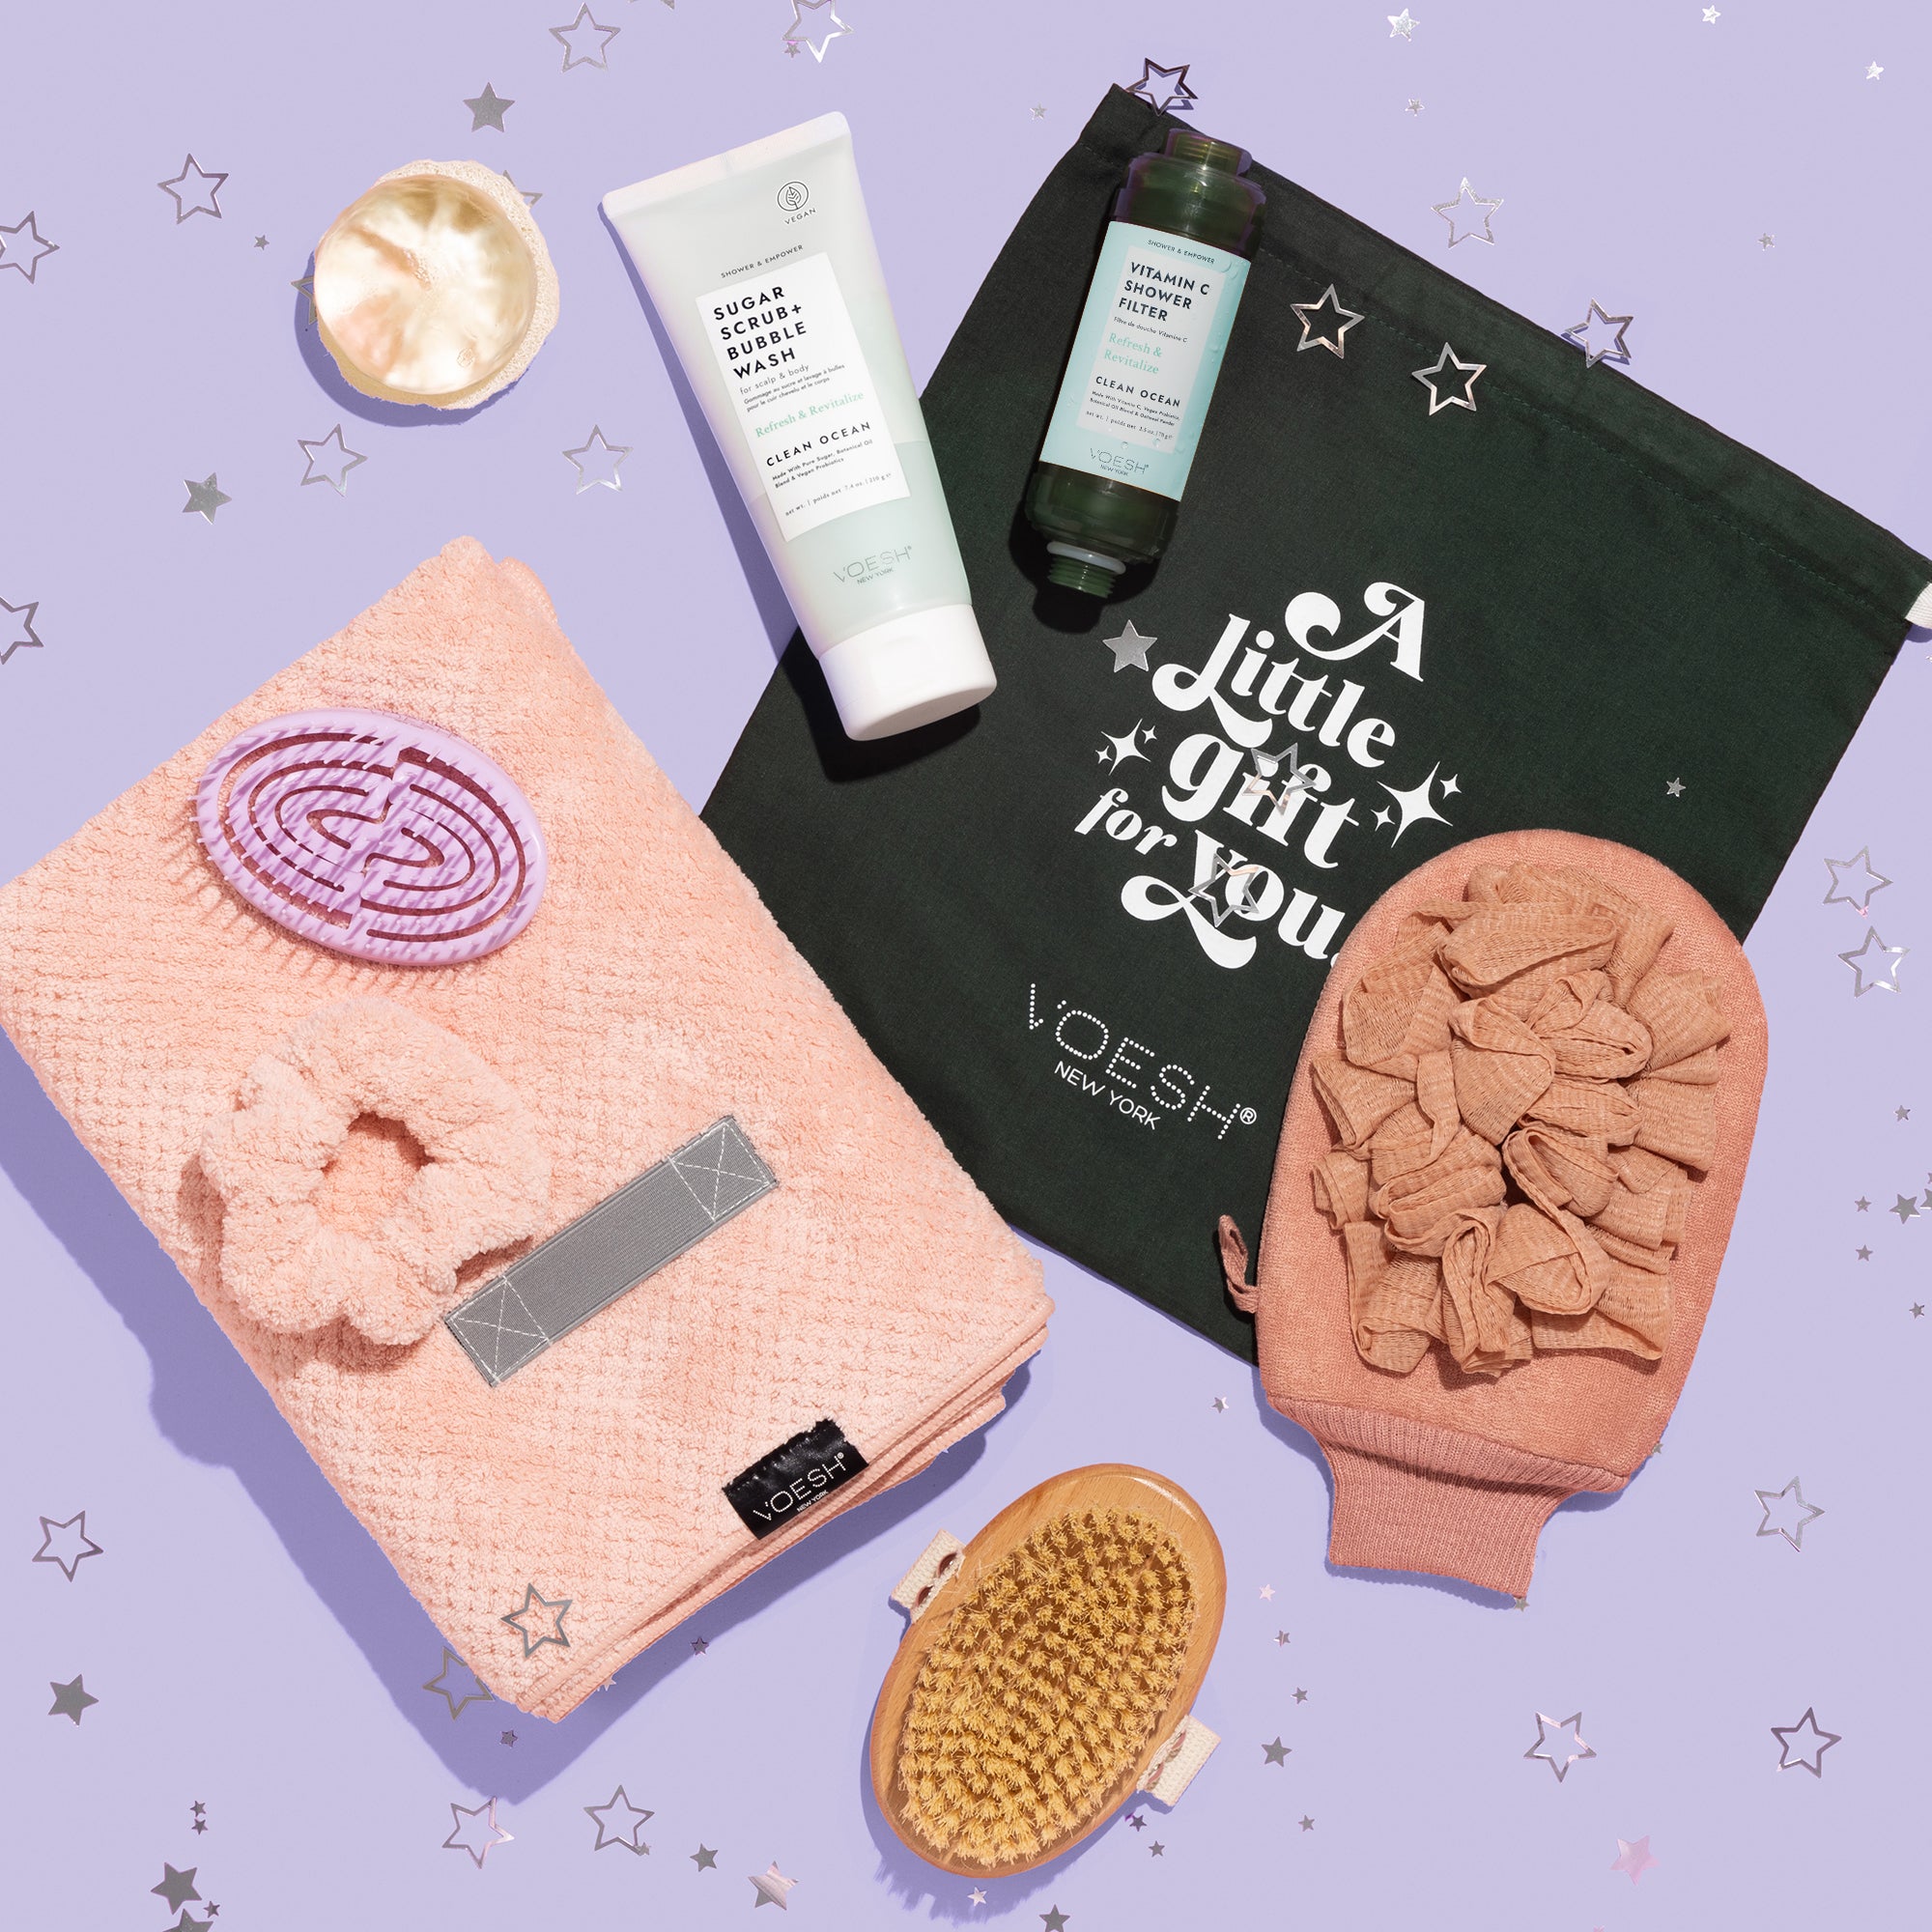 VOESH New York Holiday Pure Shower Bliss holiday kit, laid out on top of a purple starred background.